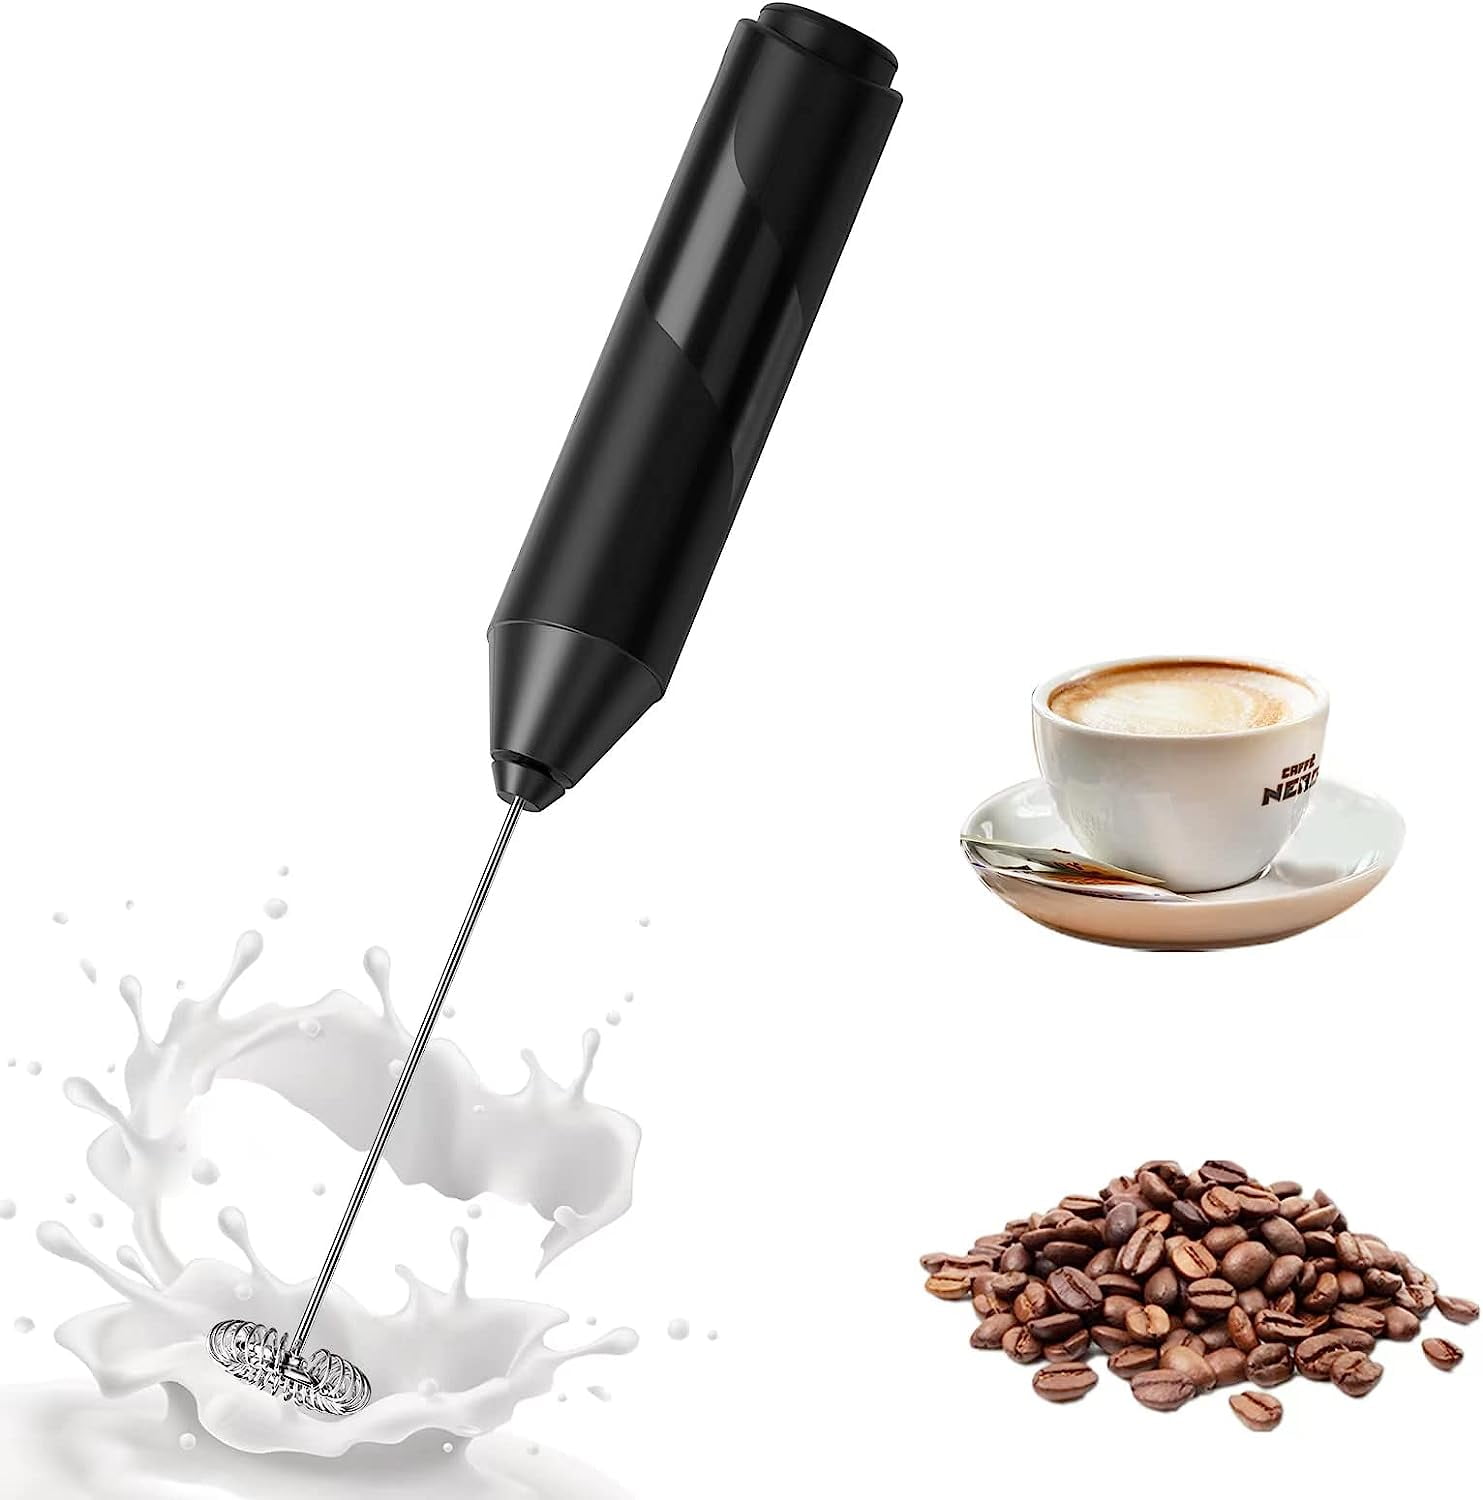 Small electric whisk stock photo. Image of coffee, loops - 17792022